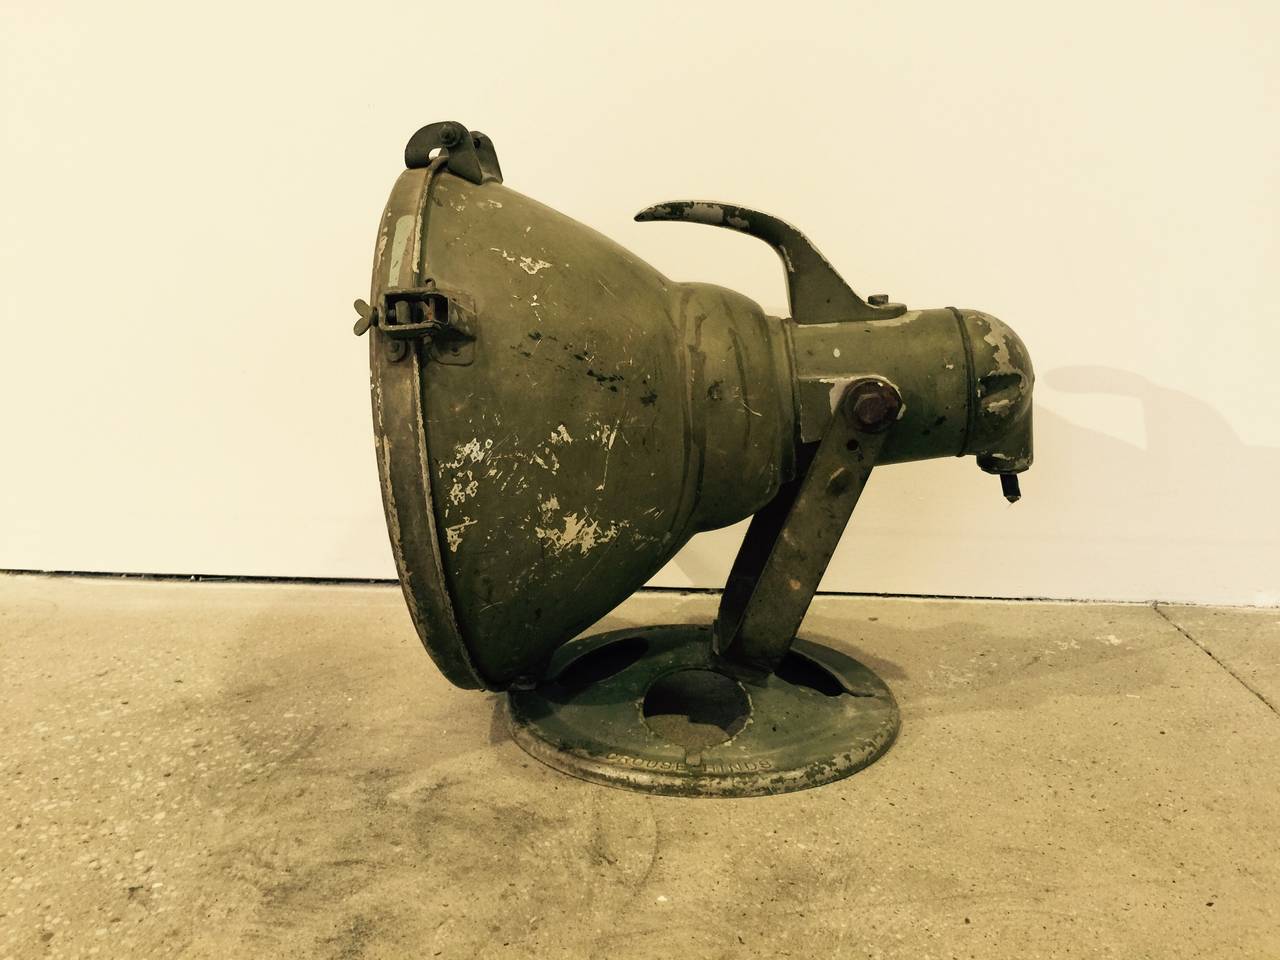 Vintage industrial / nautical spotlight by Crouse Hinds.  USA, circa 1930-1940.  Retains some original gray paint.  For display only; not recommended for lighting purposes.